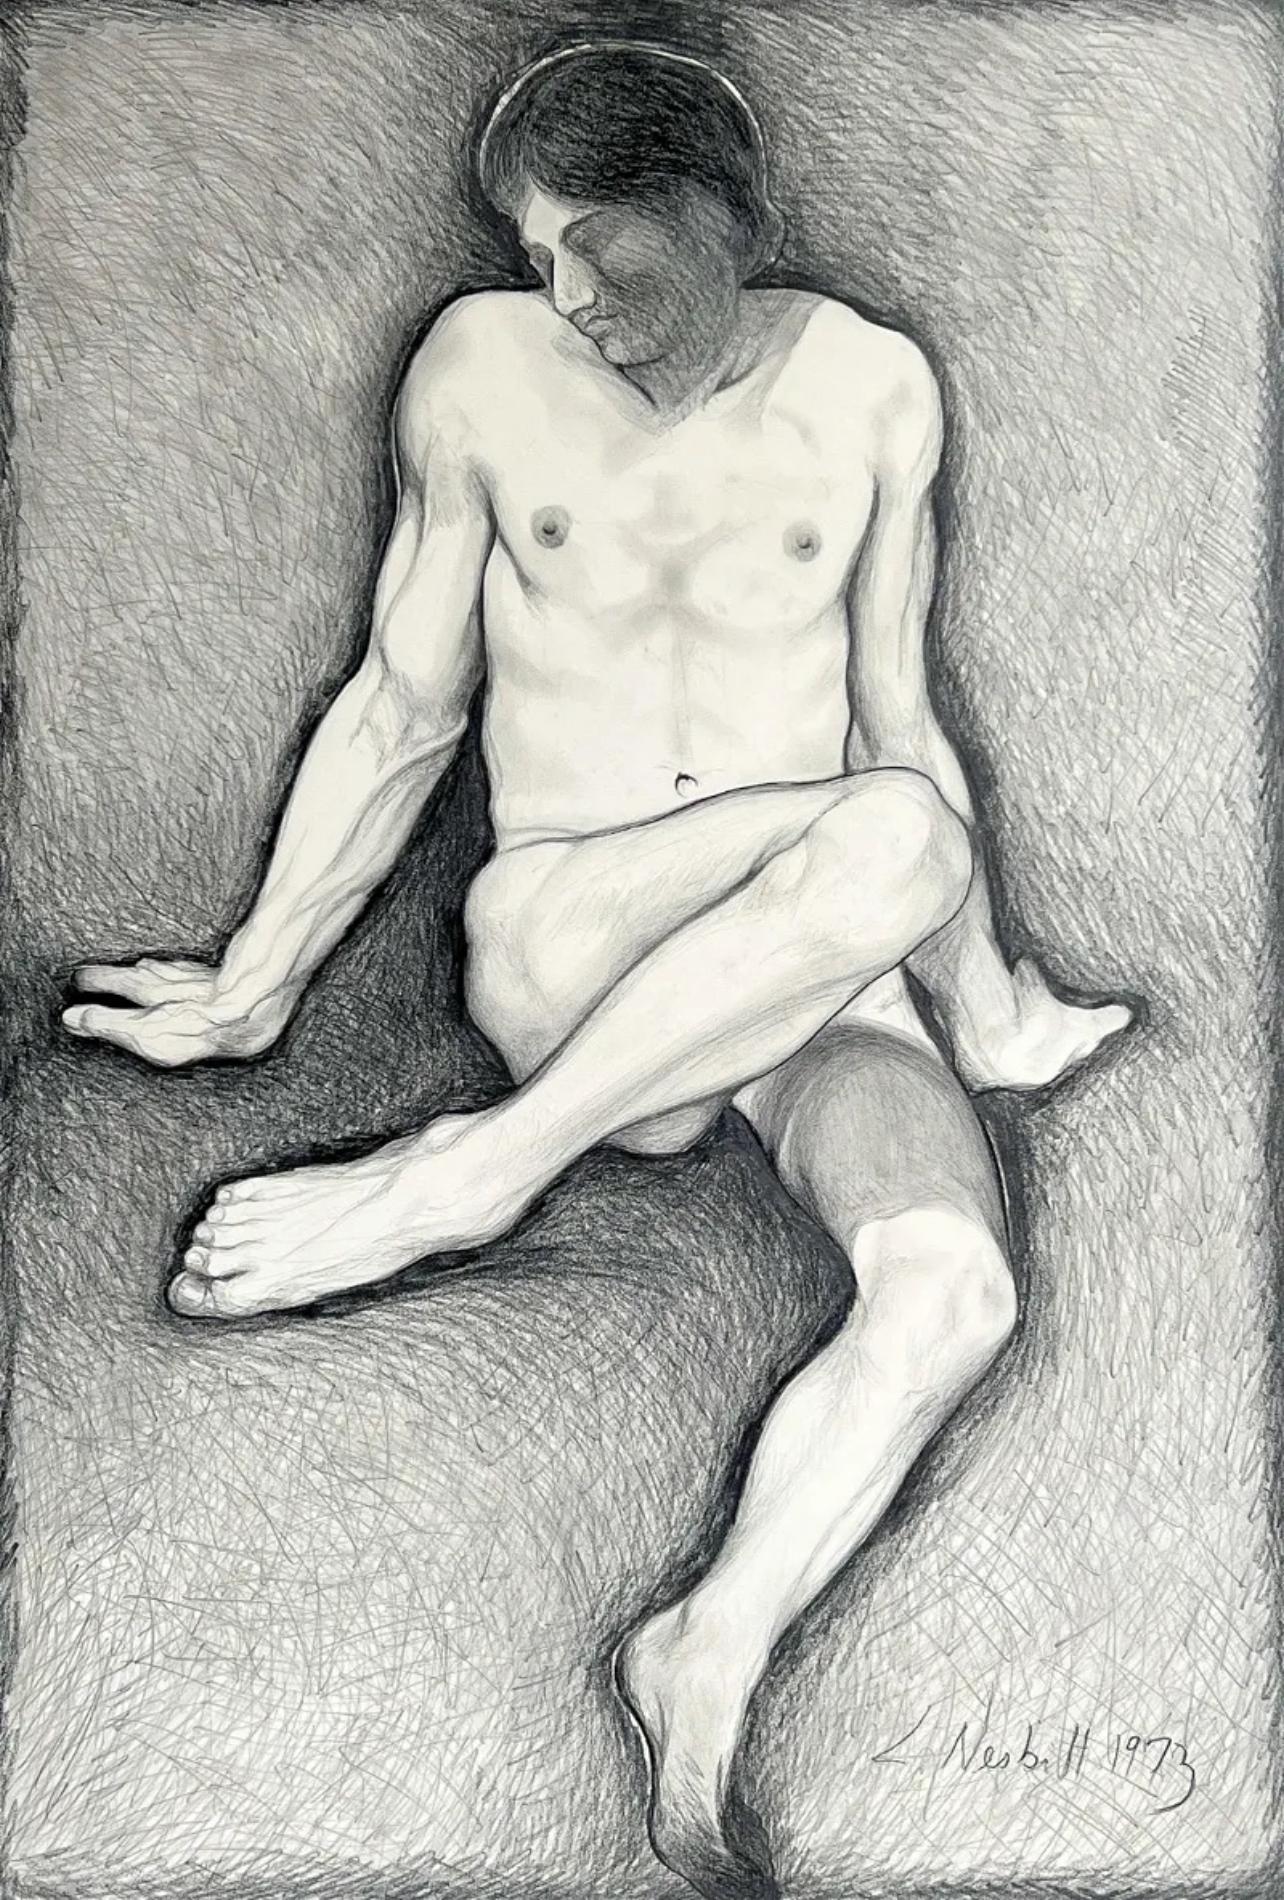 Artist: Lowell Nesbitt (1933-1993)
Title: (Male Nude) Untitled, 1973
Year: 1973
Medium: Graphite on Artist's Board
Size: 40 x 30.25 inches
Condition: Excellent
Inscription: Signed & dated in pencil

LOWELL NESBITT (1933-1993) One of the most